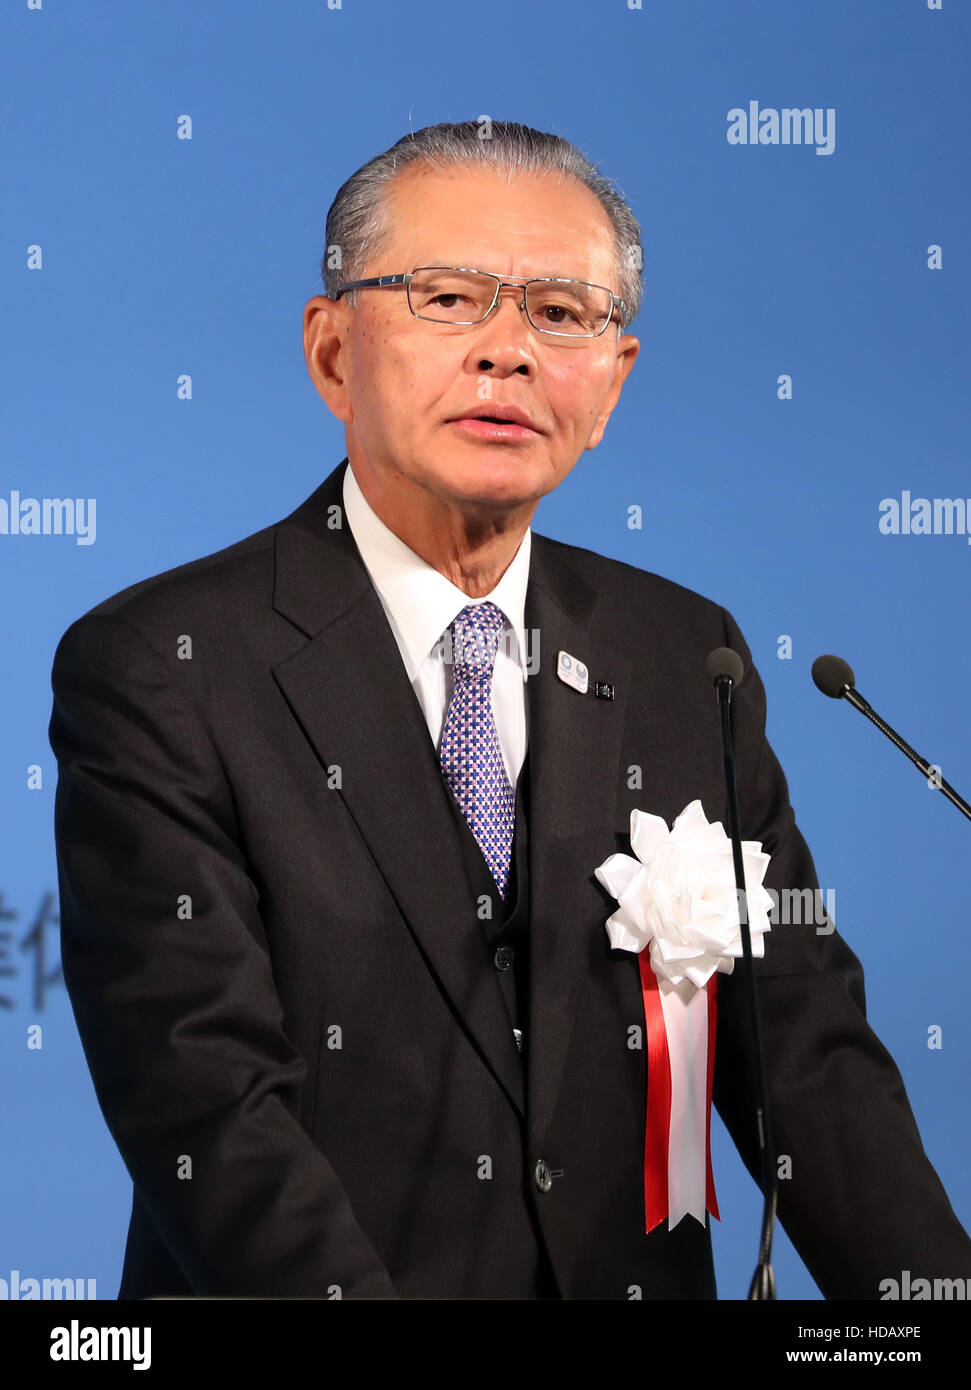 Tokyo, Japan. 11th Dec, 2016. Japanese general contractor Taisei Corporation chairman Takashi Yamauchi delivers a speech as he attends the ground breaking ceremony for the new national stadium in Tokyo on Sunday, December 11, 2016. The new national stadium will be finished in November 2019. © Yoshio Tsunoda/AFLO/Alamy Live News Stock Photo